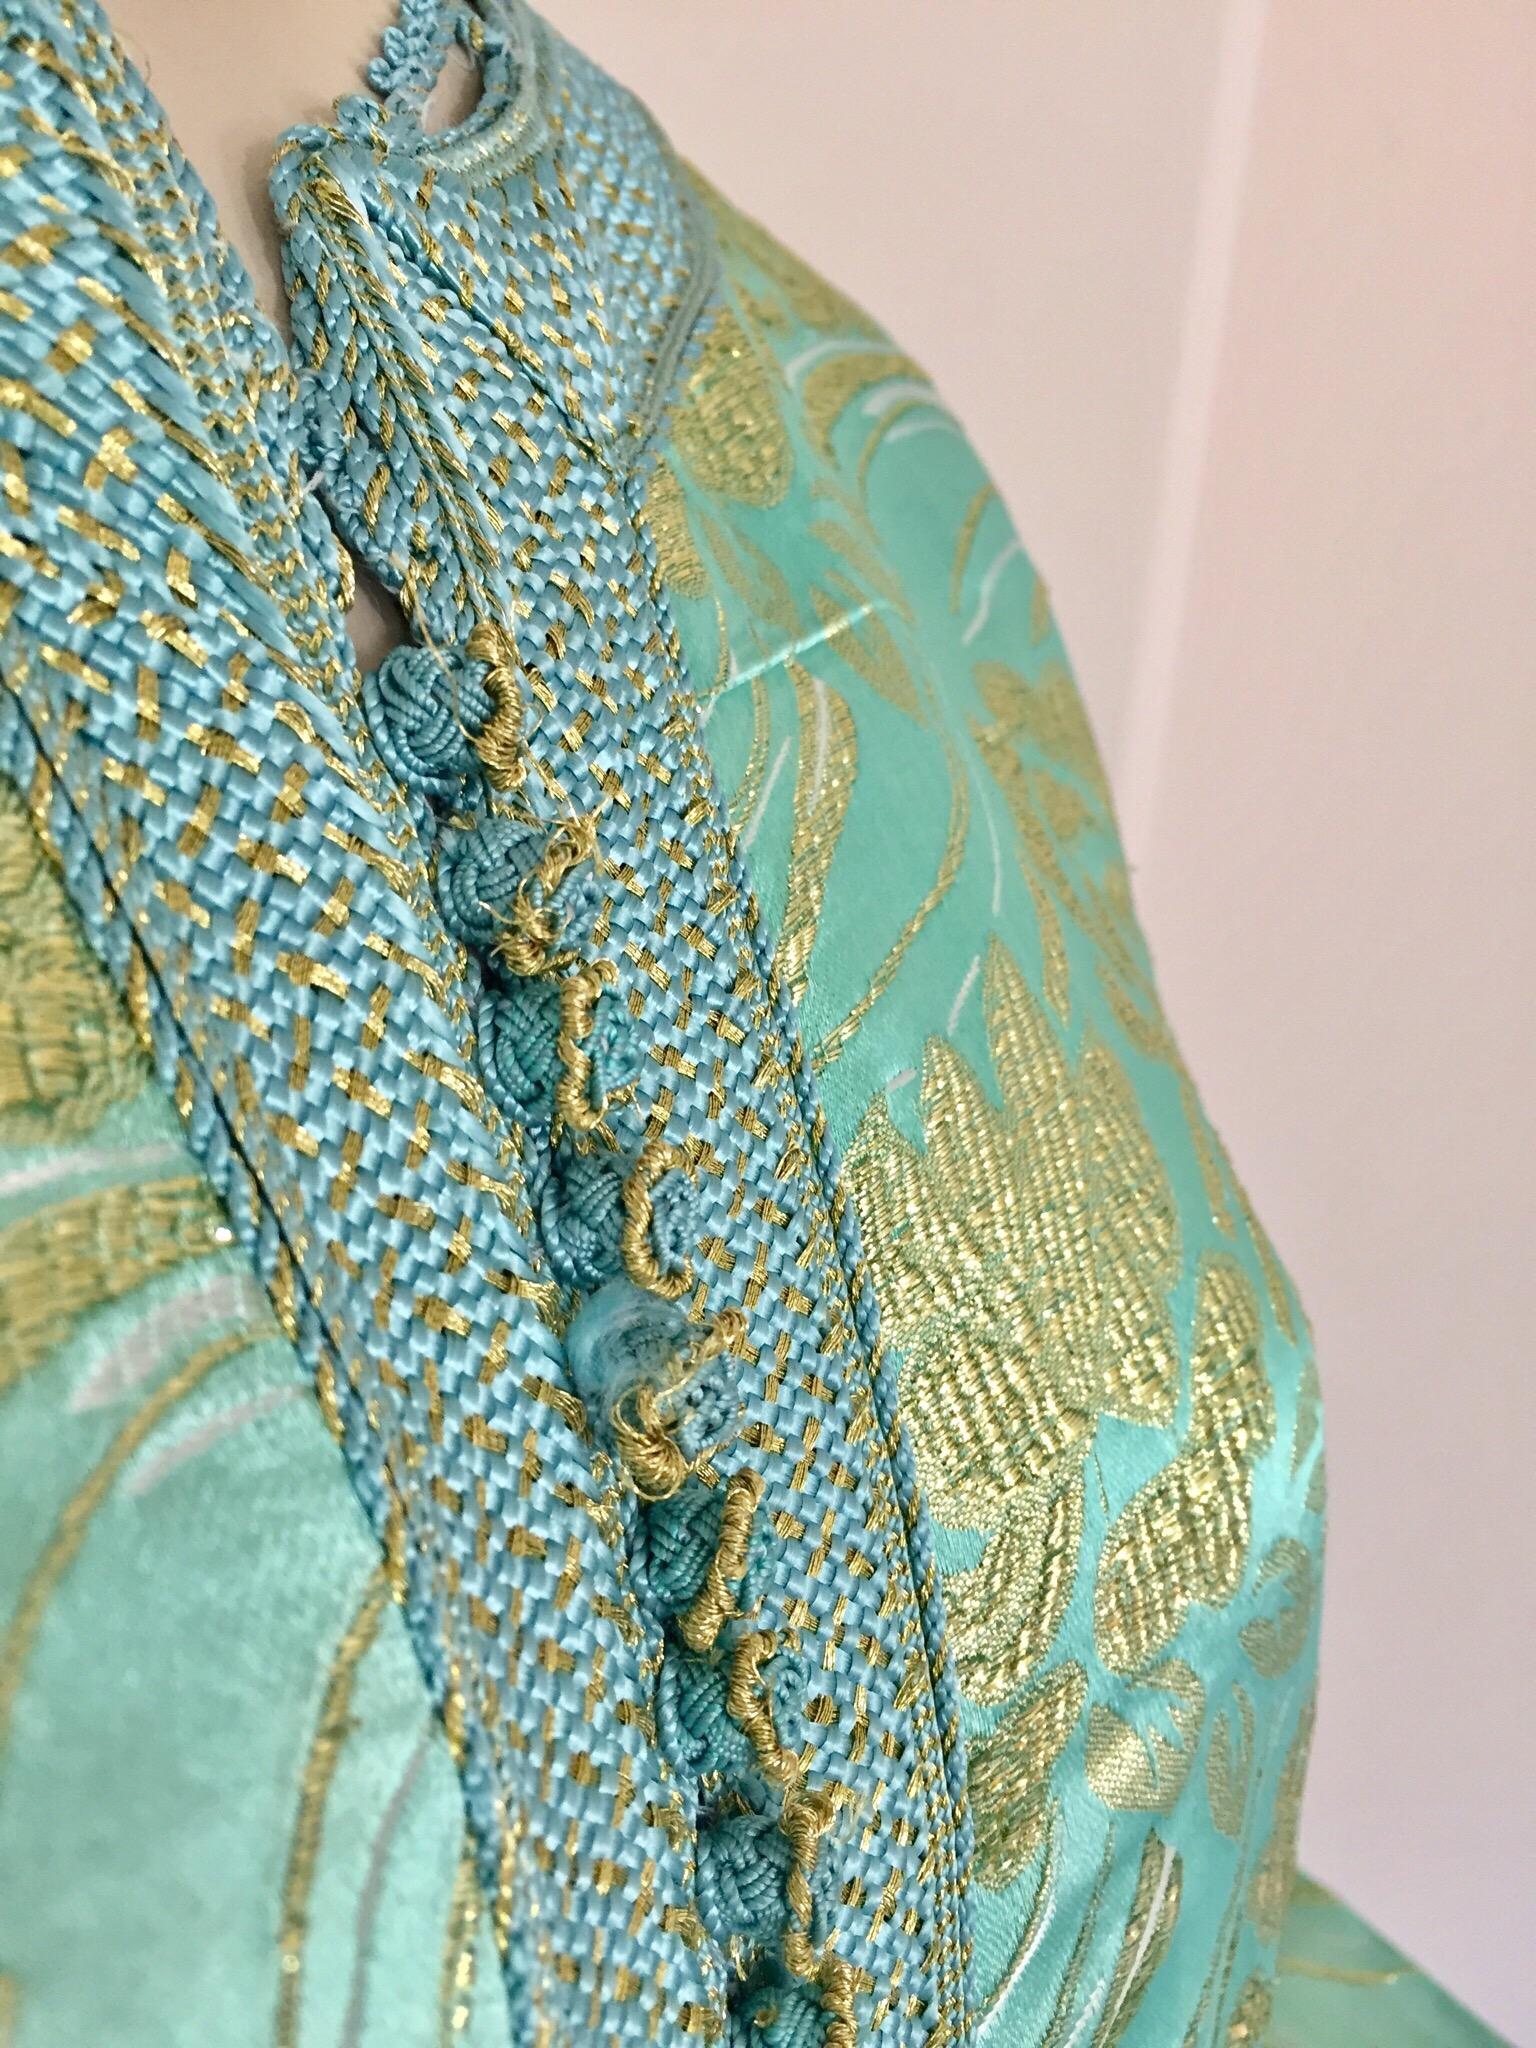 Moroccan Vintage Kaftan in Turquoise and Gold Floral Brocade Metallic Lame - 1 For Sale 7